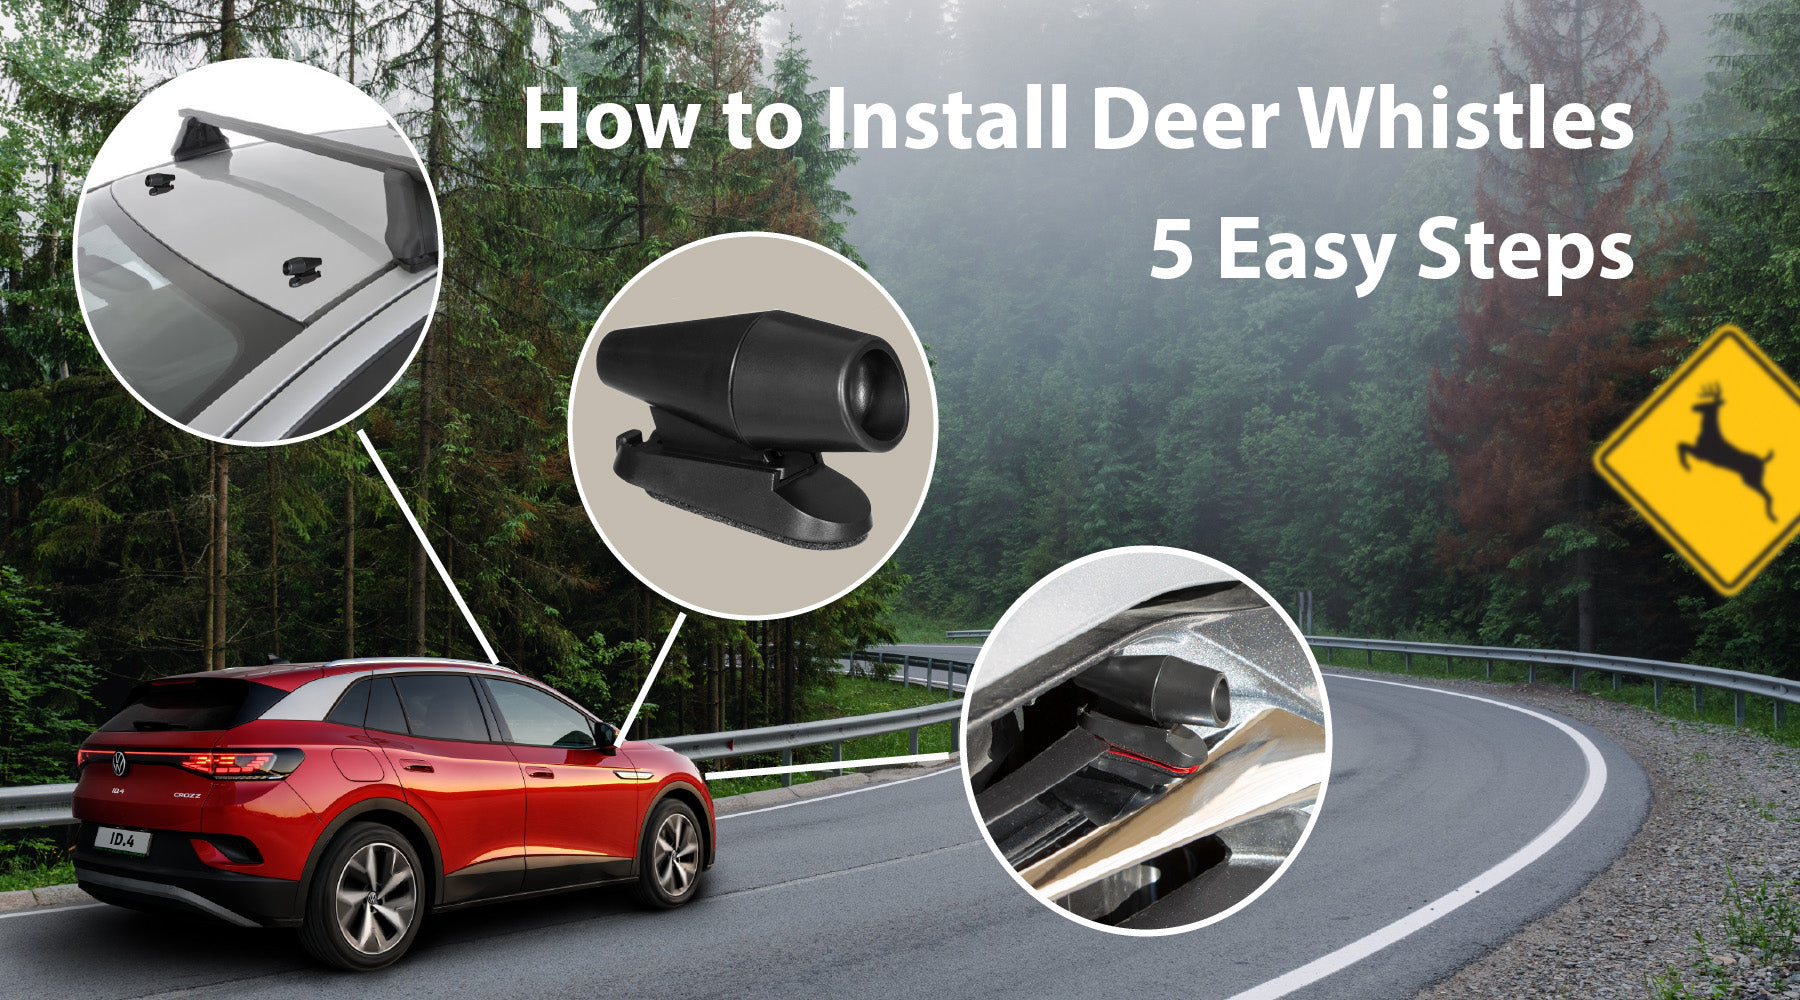 These deer whistles for your car (which ring in at under $3 a pop